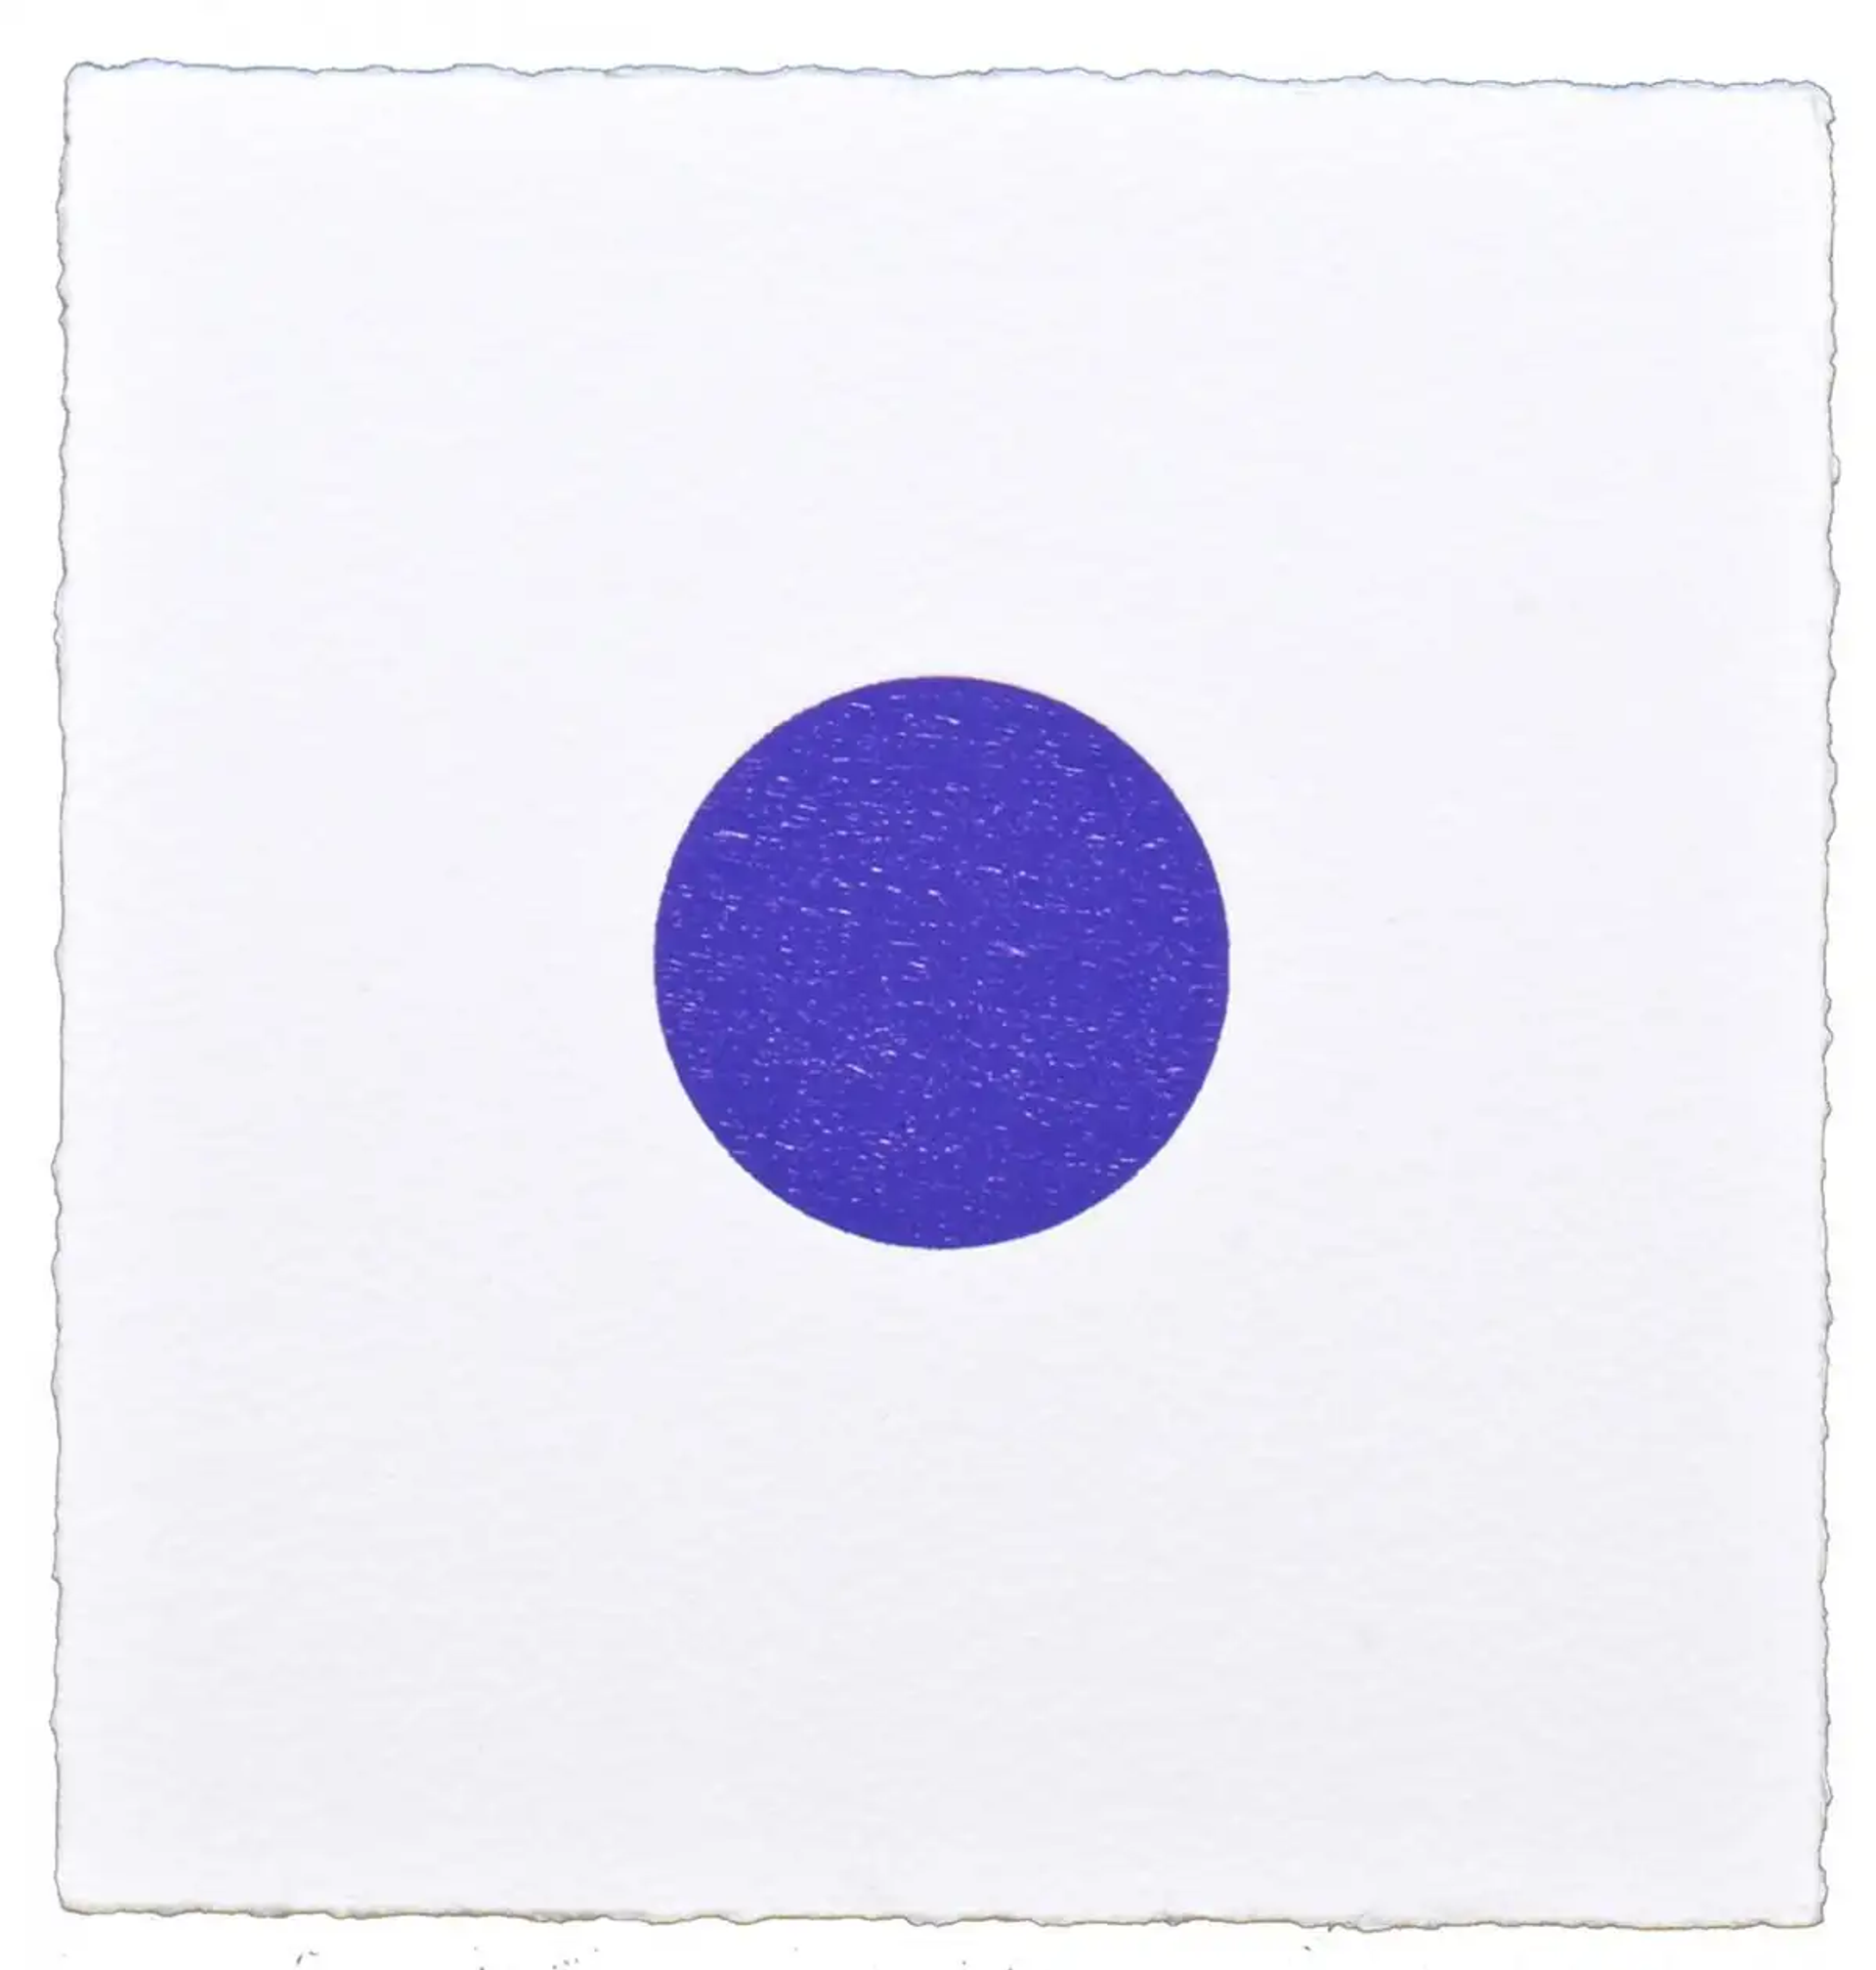 The print shows a perfect circle in blue, positioned in the centre of the square composition, set against a plain white backdrop.